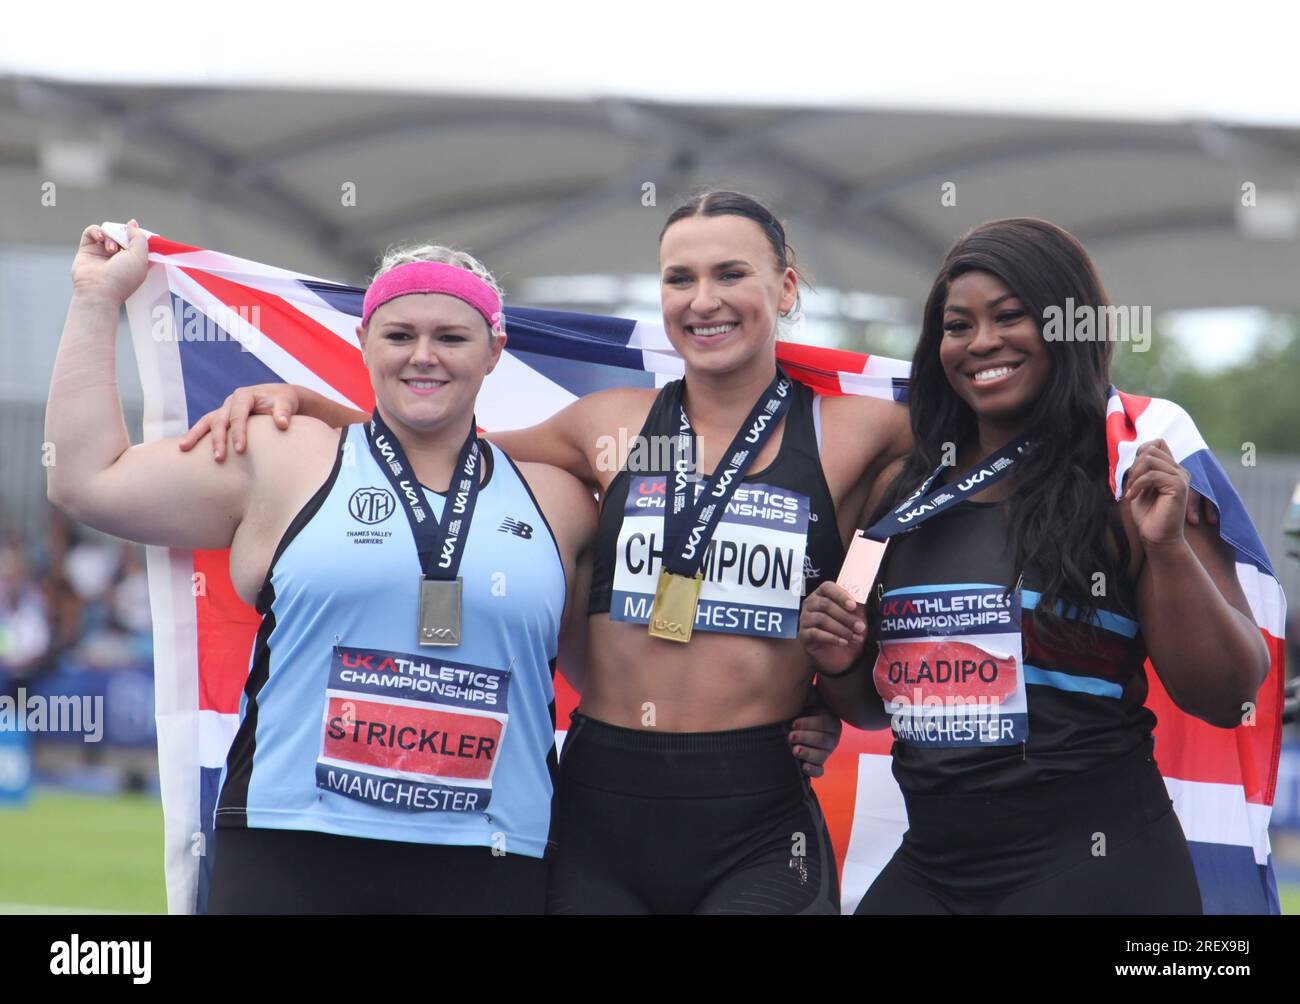 Manchester, England 9th July 2023 UK Athletics Championships & trial event for the World Championships in Budapest.  Shot put medal winners Amelia  STRICKLER (left) took silver Adele NICOLL  (centre) took gold &  Divine OLADIPO (right) took bronze The event took place at the Manchester Regional Arena, England ©Ged Noonan/Alamy Stock Photo